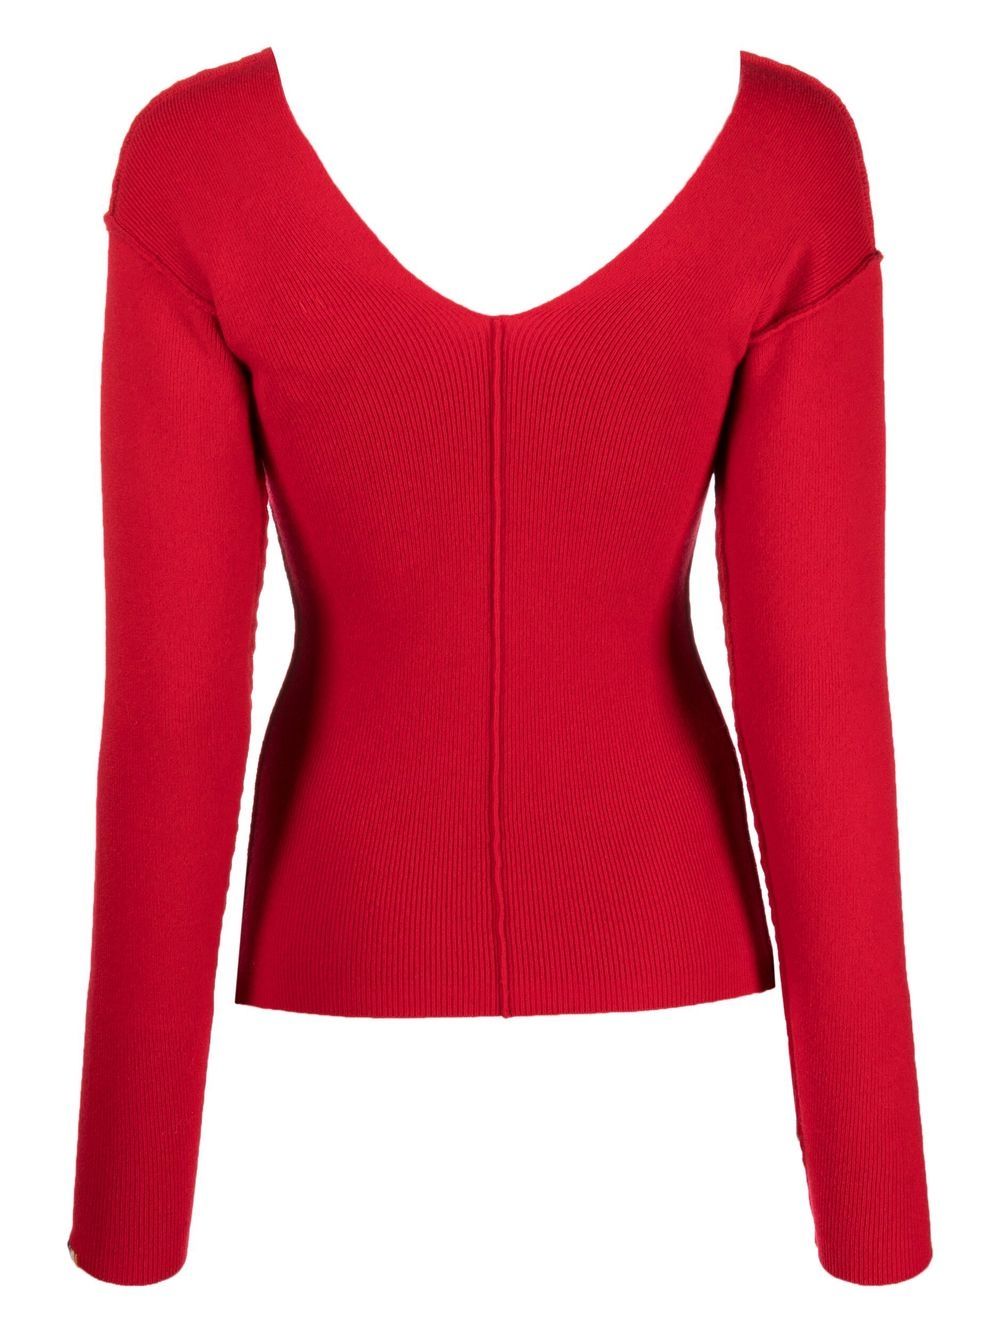 EXTREME CASHMERE RED SWEATER